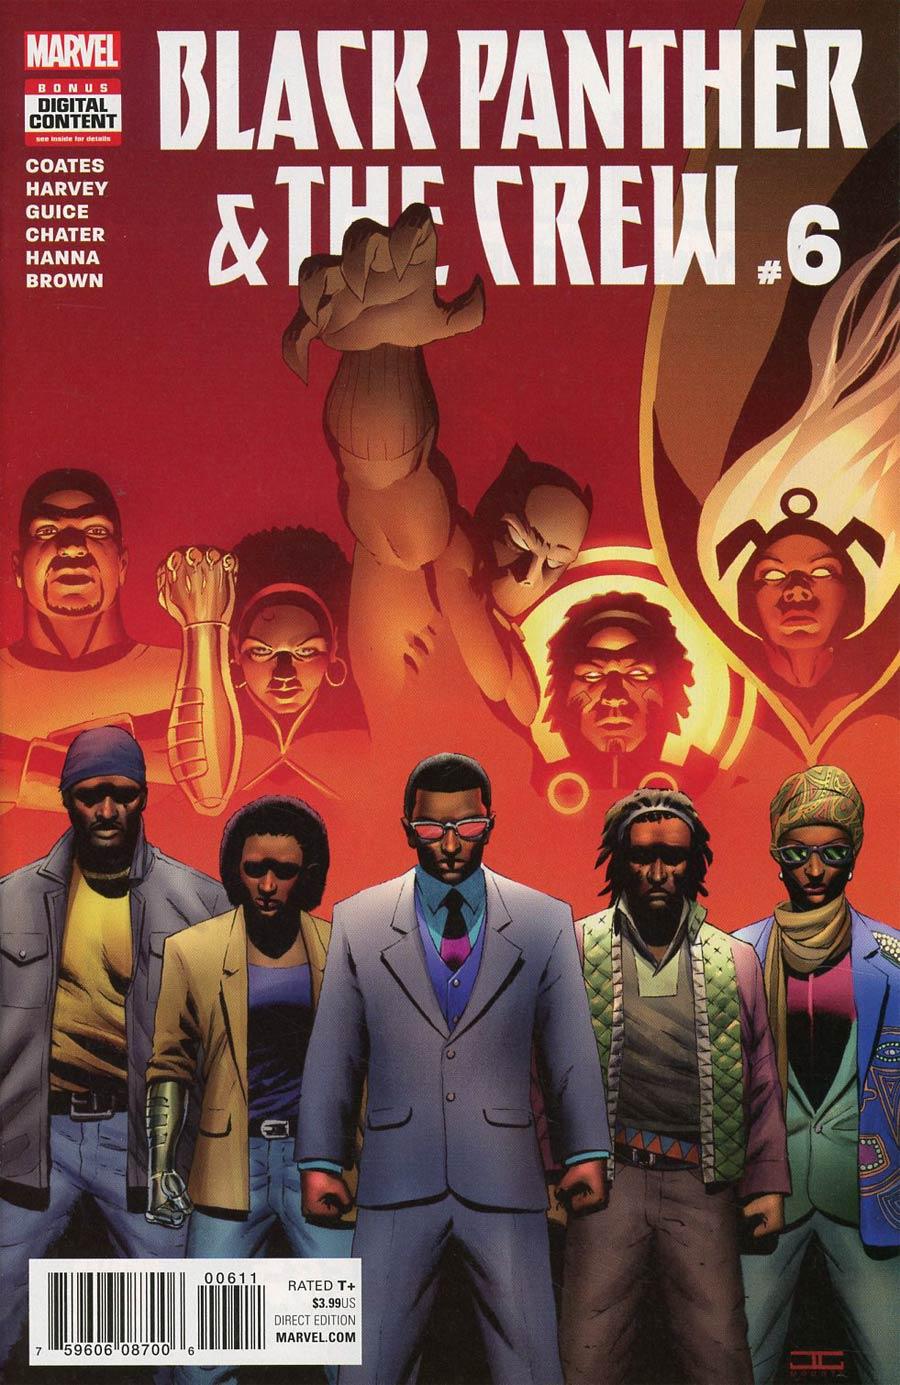 Black Panther And The Crew Vol. 1 #6